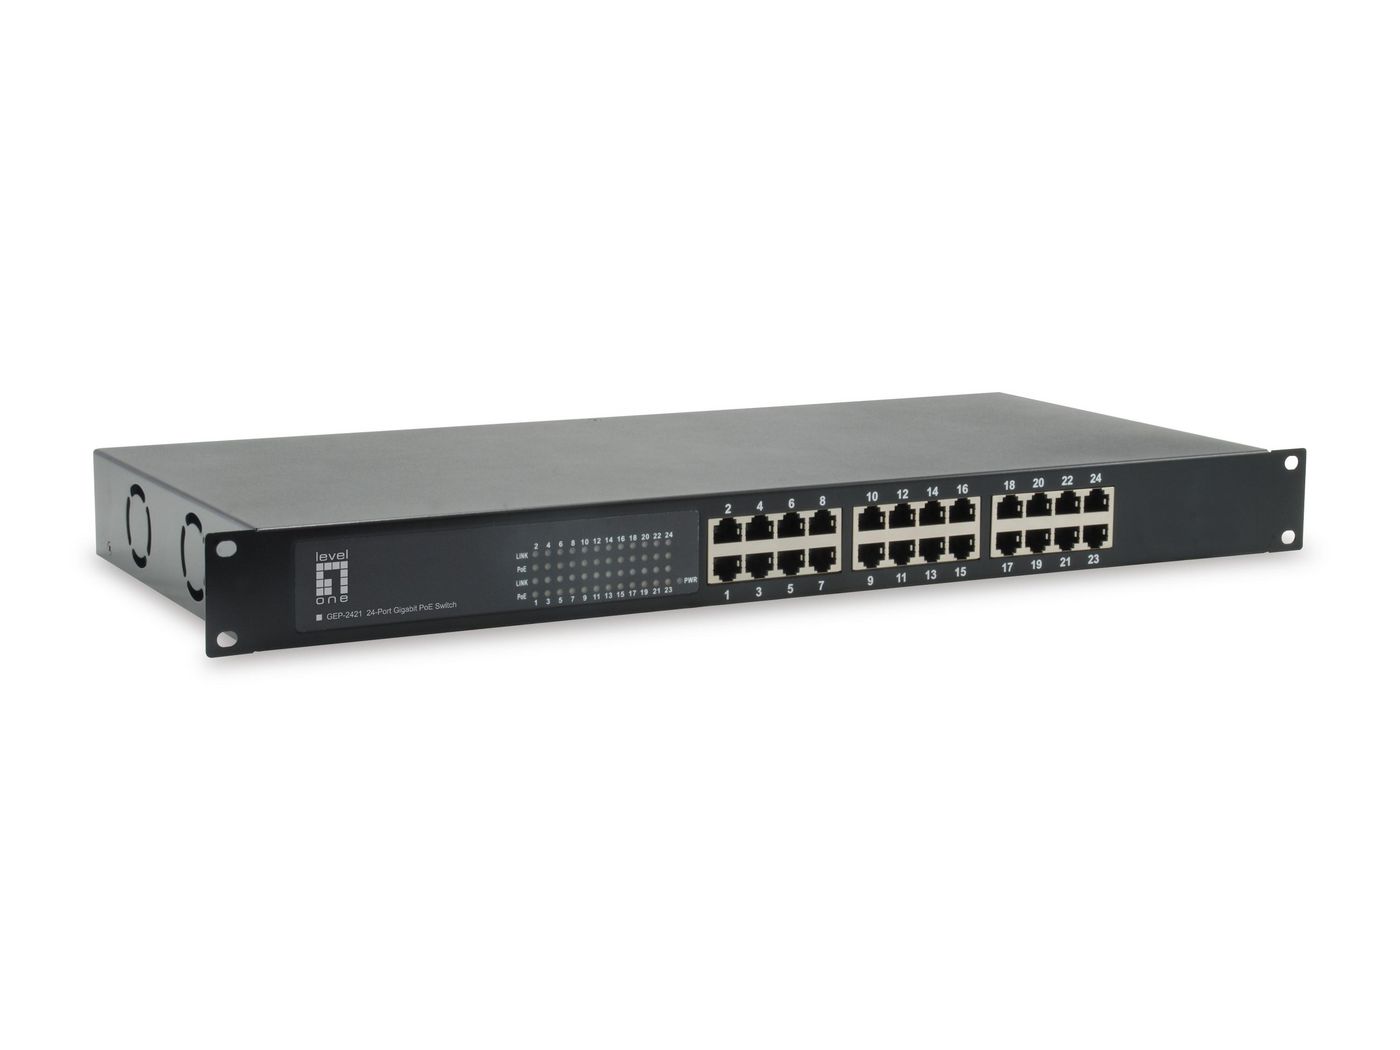 LEVEL ONE LevelOne Switch 48,3cm 24x GEP-2421W500 Gbps 802.3af/at PoE